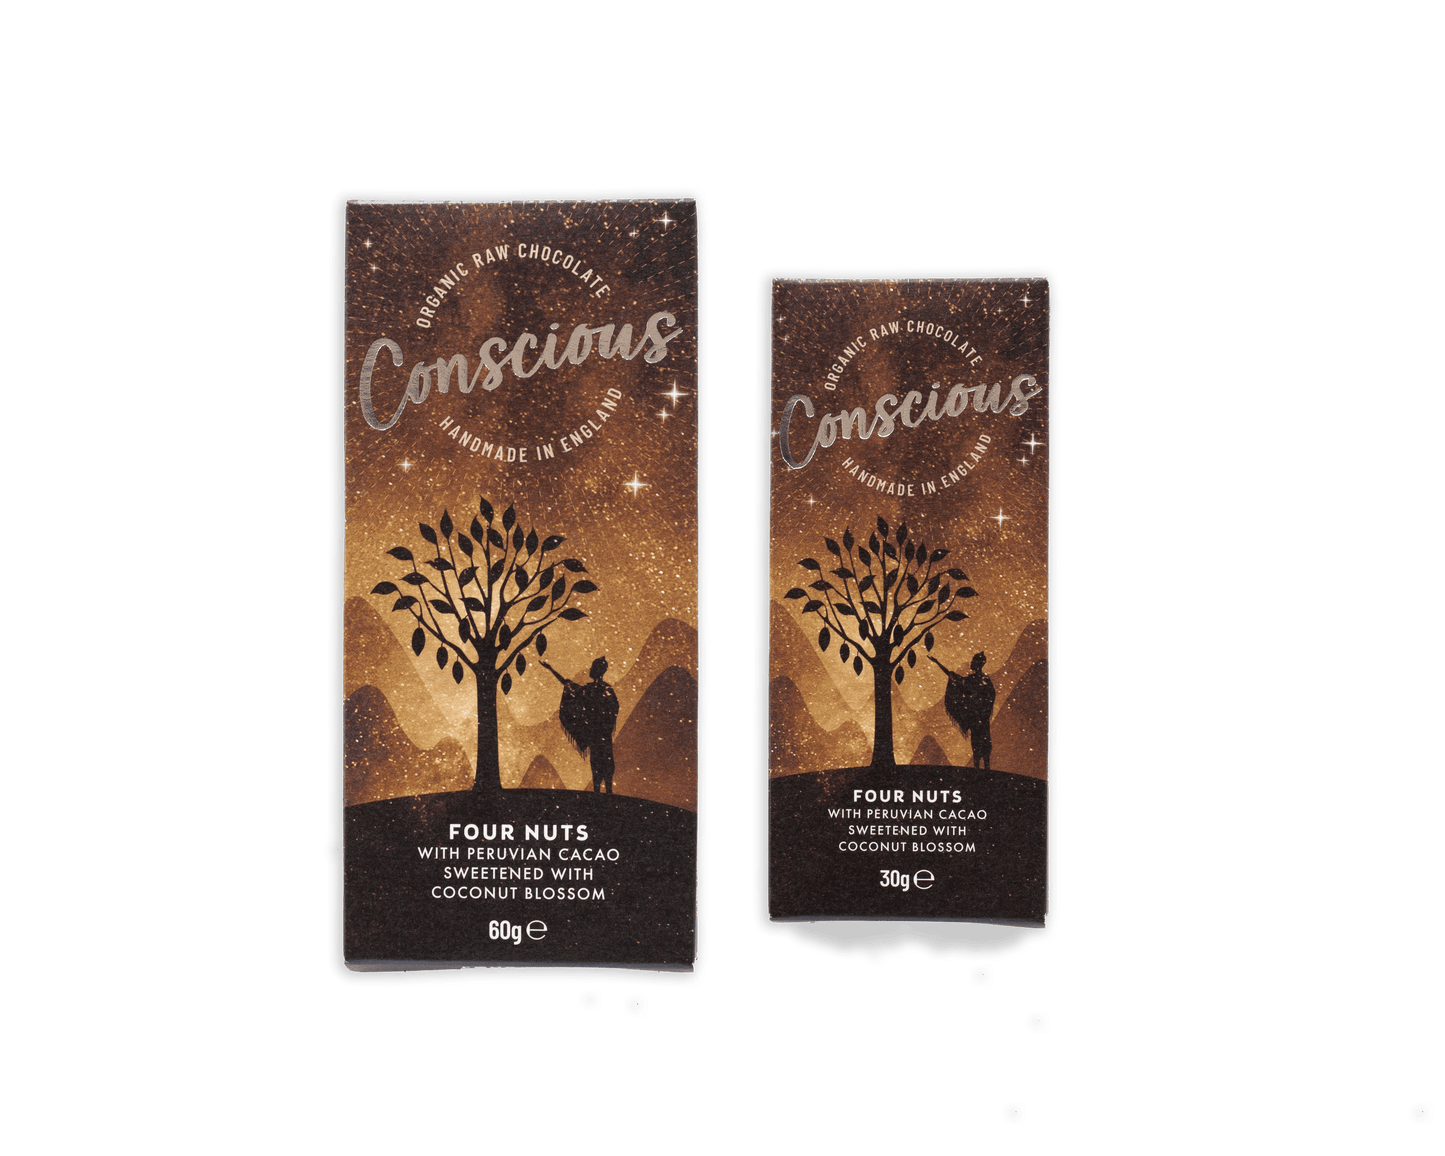 Four Nuts 60g - Conscious Chocolate